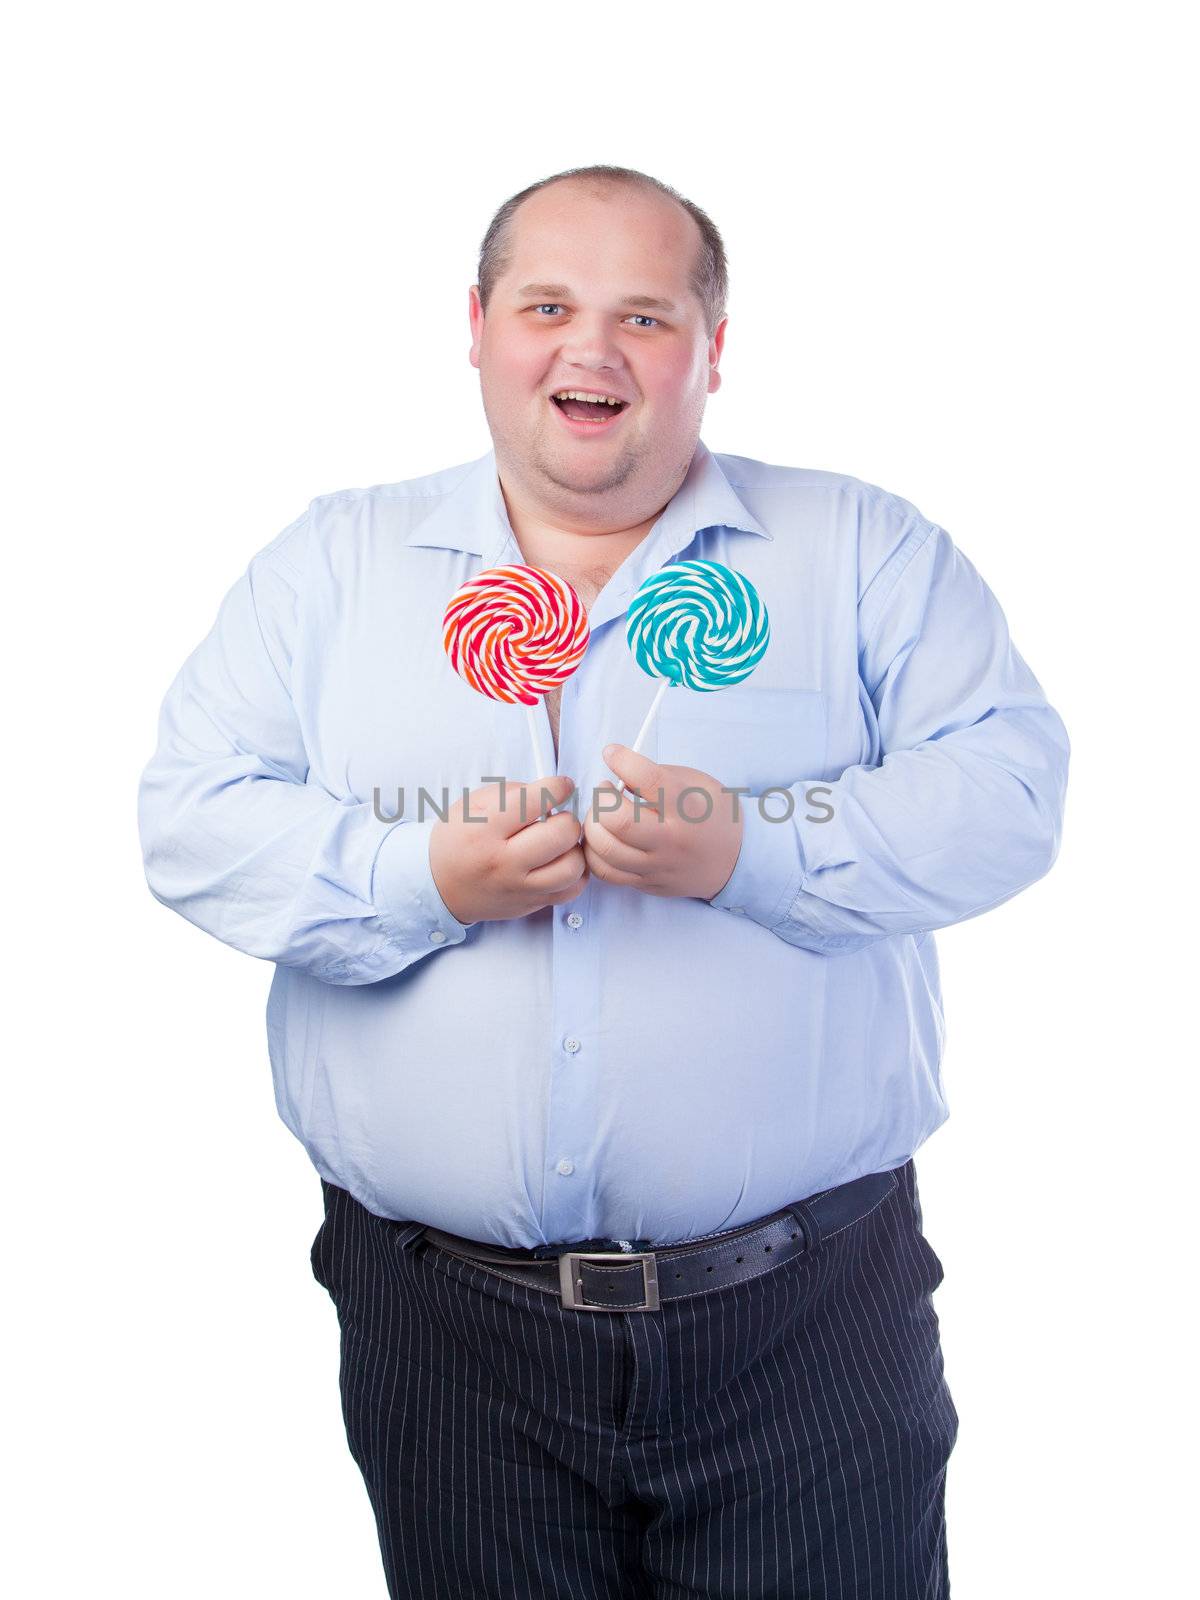 Fat Man in a Blue Shirt, Eating a Lollipop, isolated